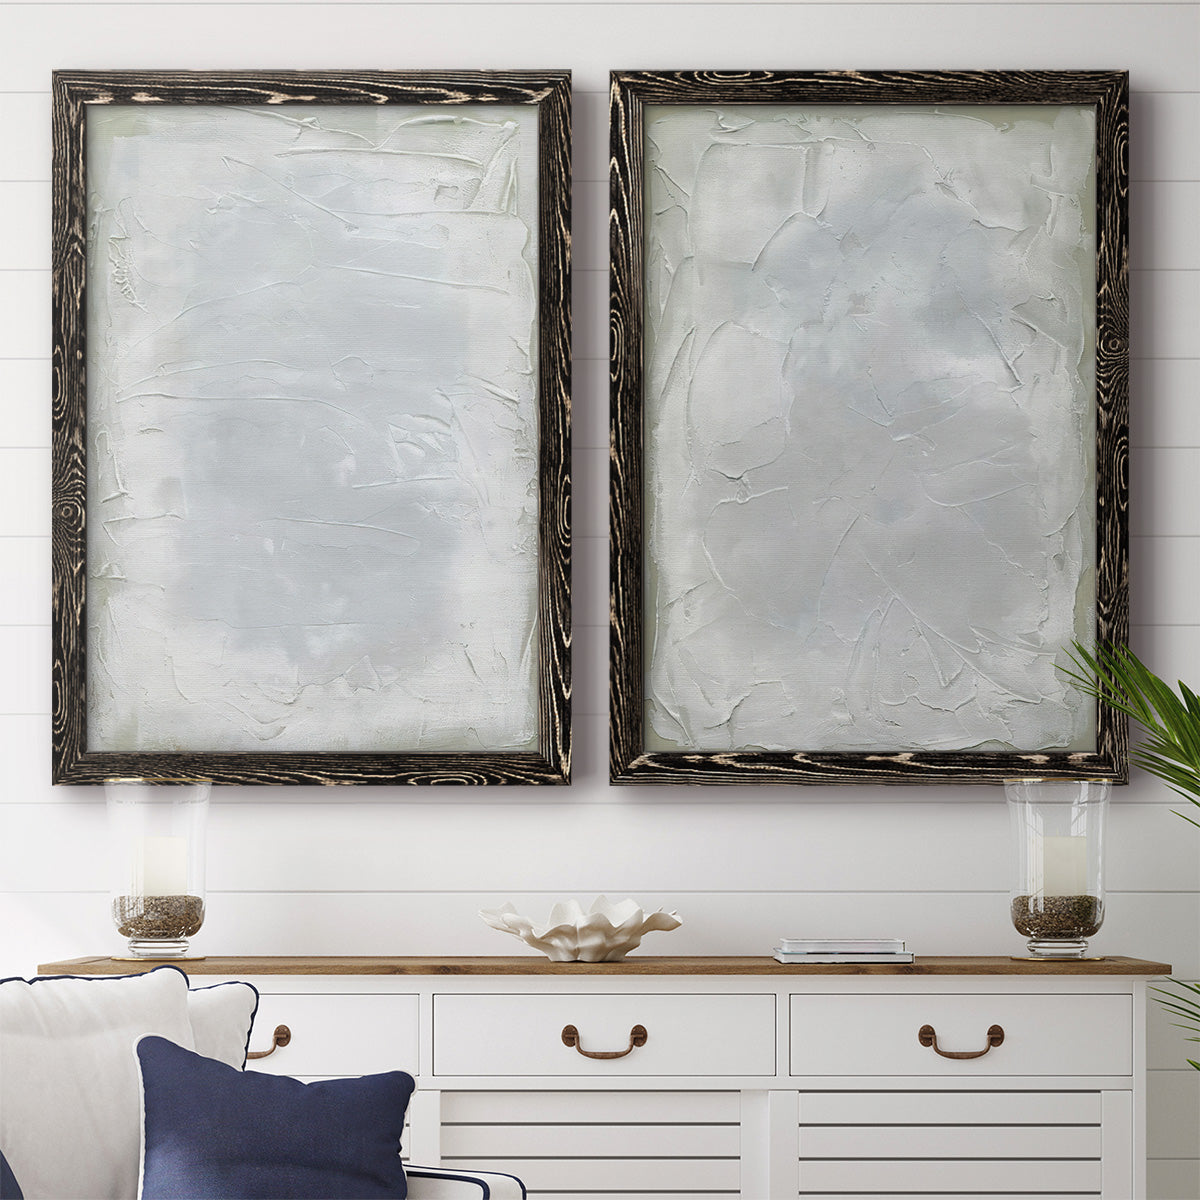 Subtle Transitions I - Premium Framed Canvas 2 Piece Set - Ready to Hang